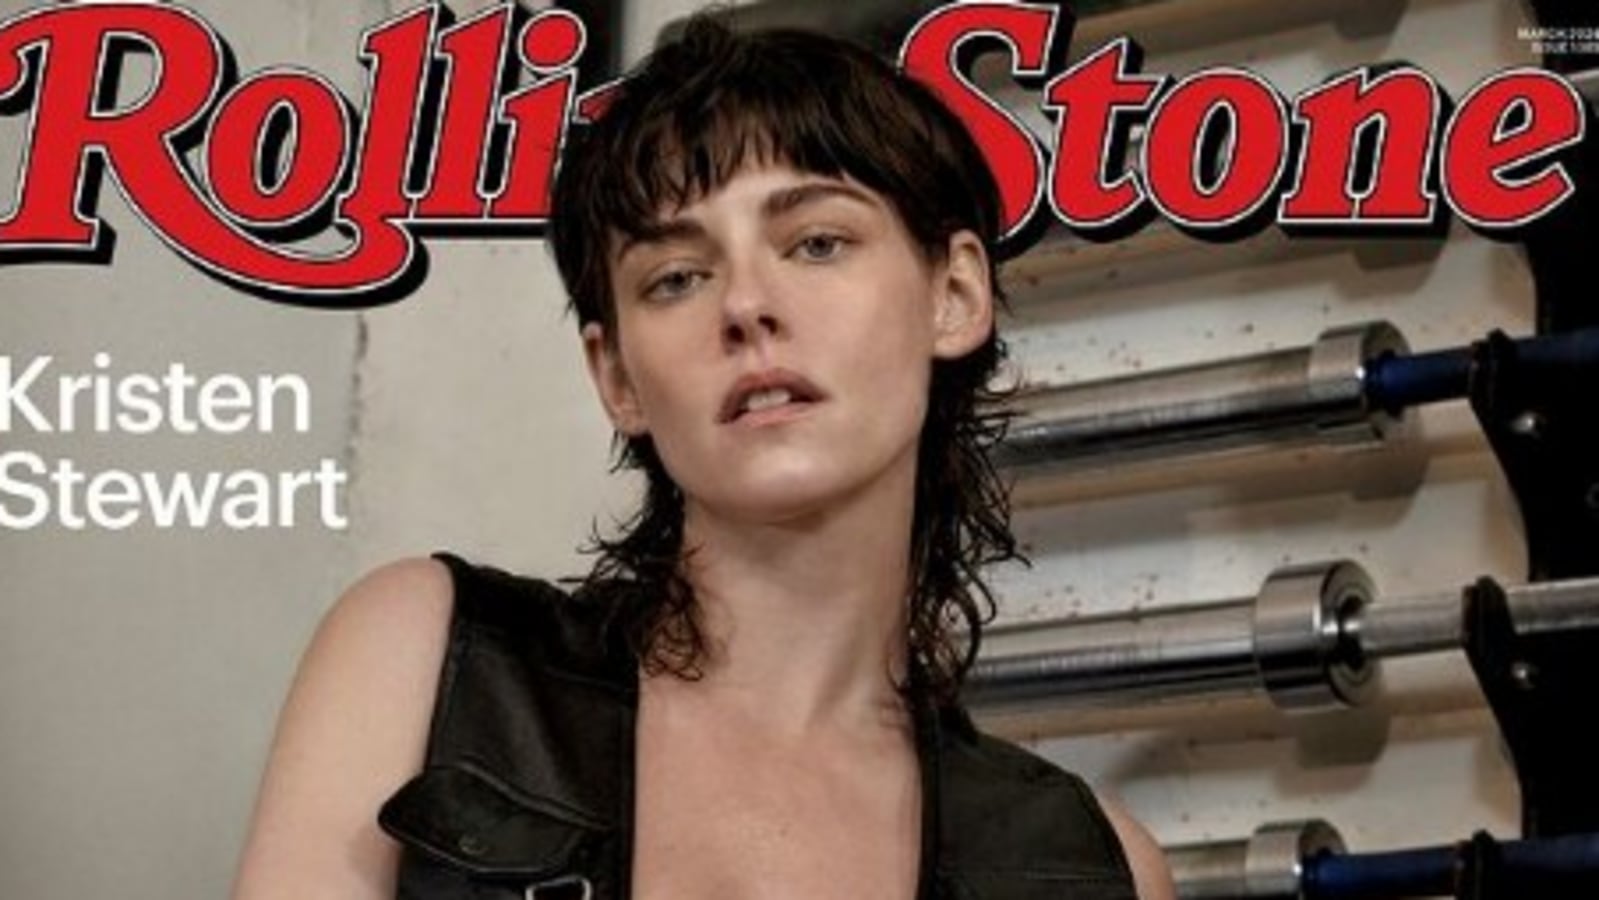 New Rolling Stone cover features Kristen Stewart ‘uncensored’ | Hollywood